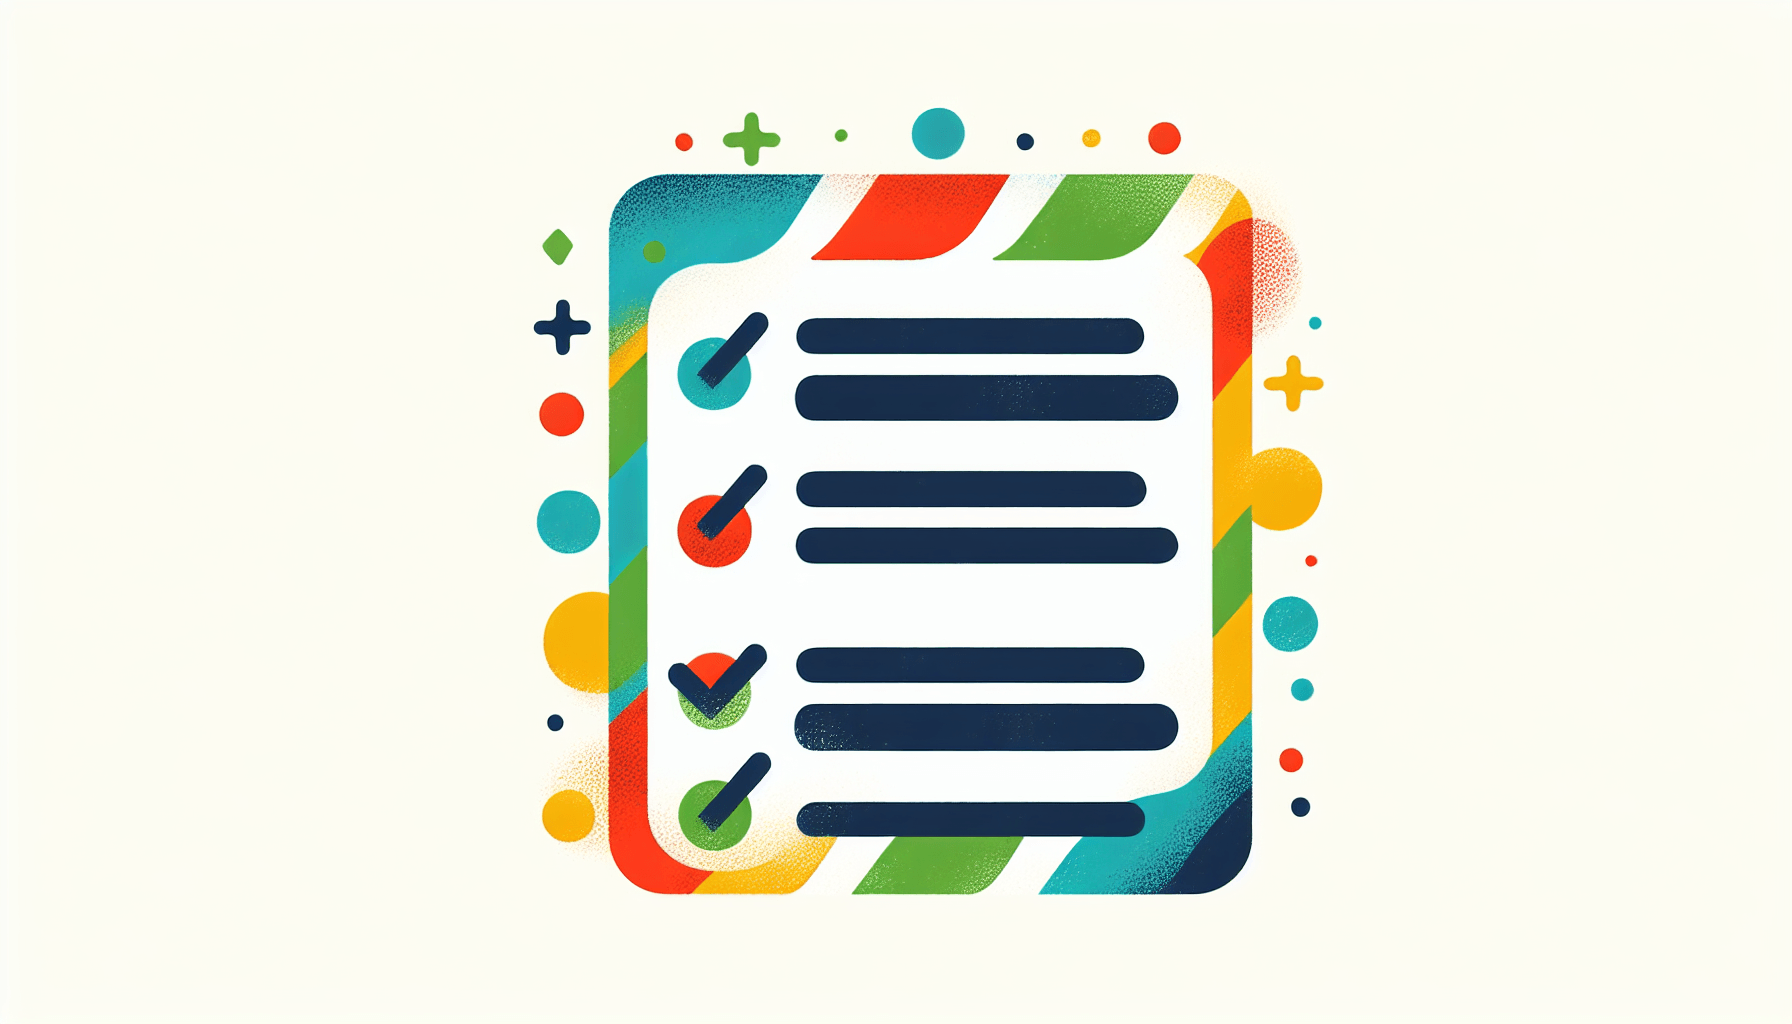 Checklist in flat illustration style and white background, red #f47574, green #88c7a8, yellow #fcc44b, and blue #645bc8 colors.